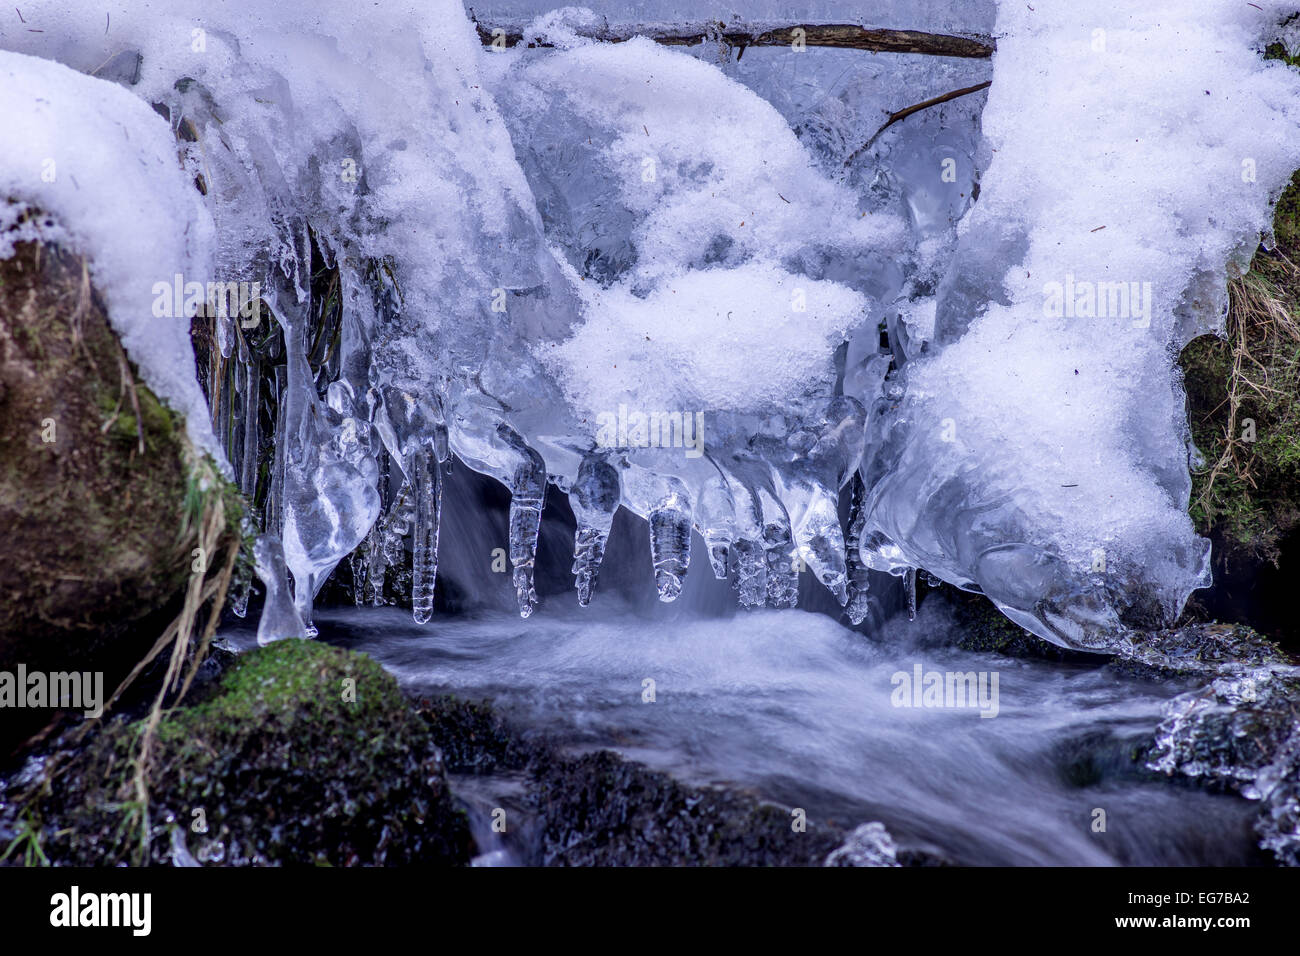 Icicles and snow in flowing water Stock Photo